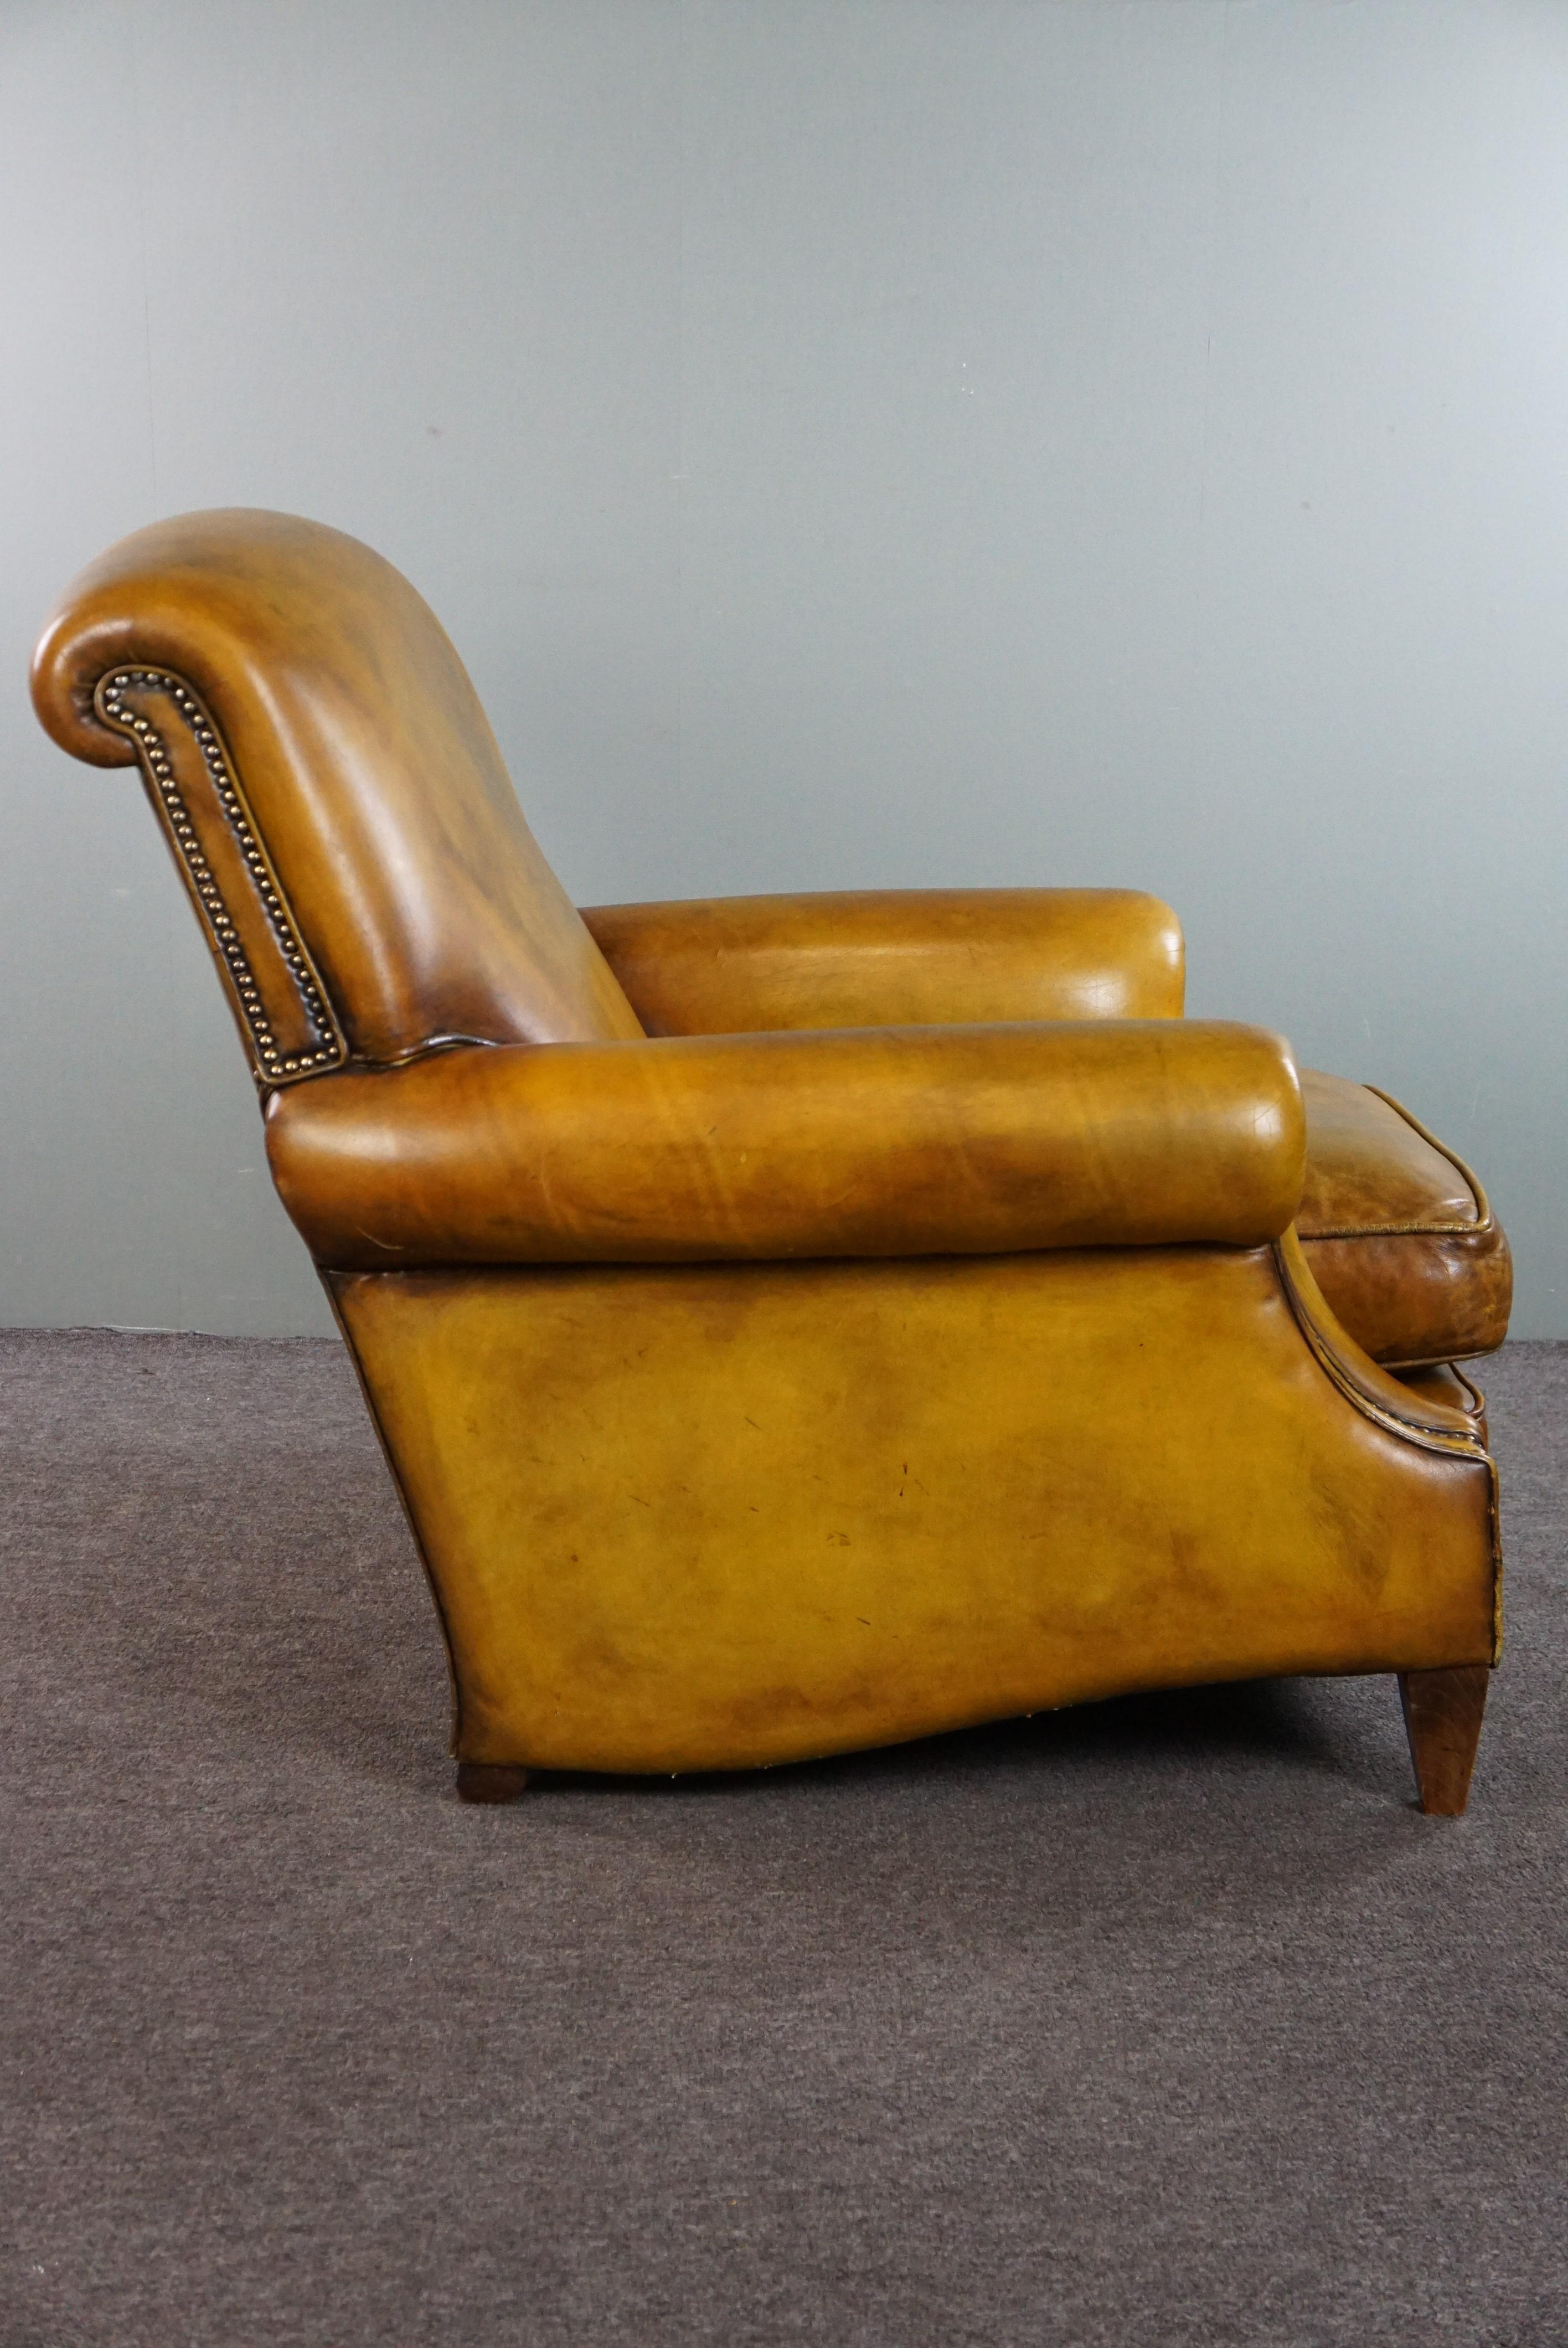 Classical Roman Large cowhide armchair on wheels For Sale